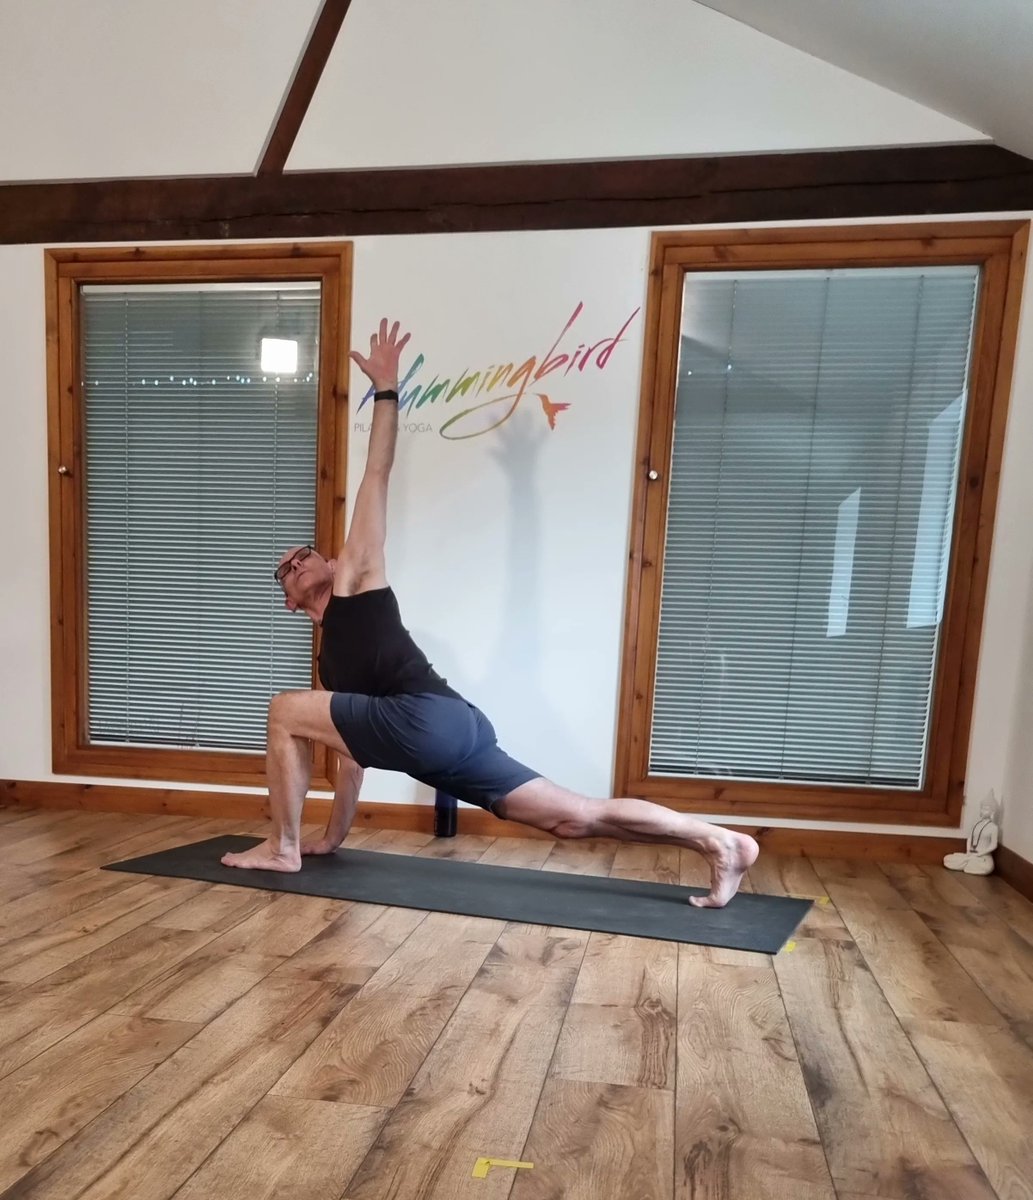 Steve will take care of all your yoga needs today - he's great at finding out what you need from your class and ensuring you get just that 9:30-10:30 Vinyasa Flow Yoga 11:00-12:00 Beginners Hatha Yoga 19:00-20:00 Hatha Yoga #hummingbirdpilatesyoga #hummingbird #pilates